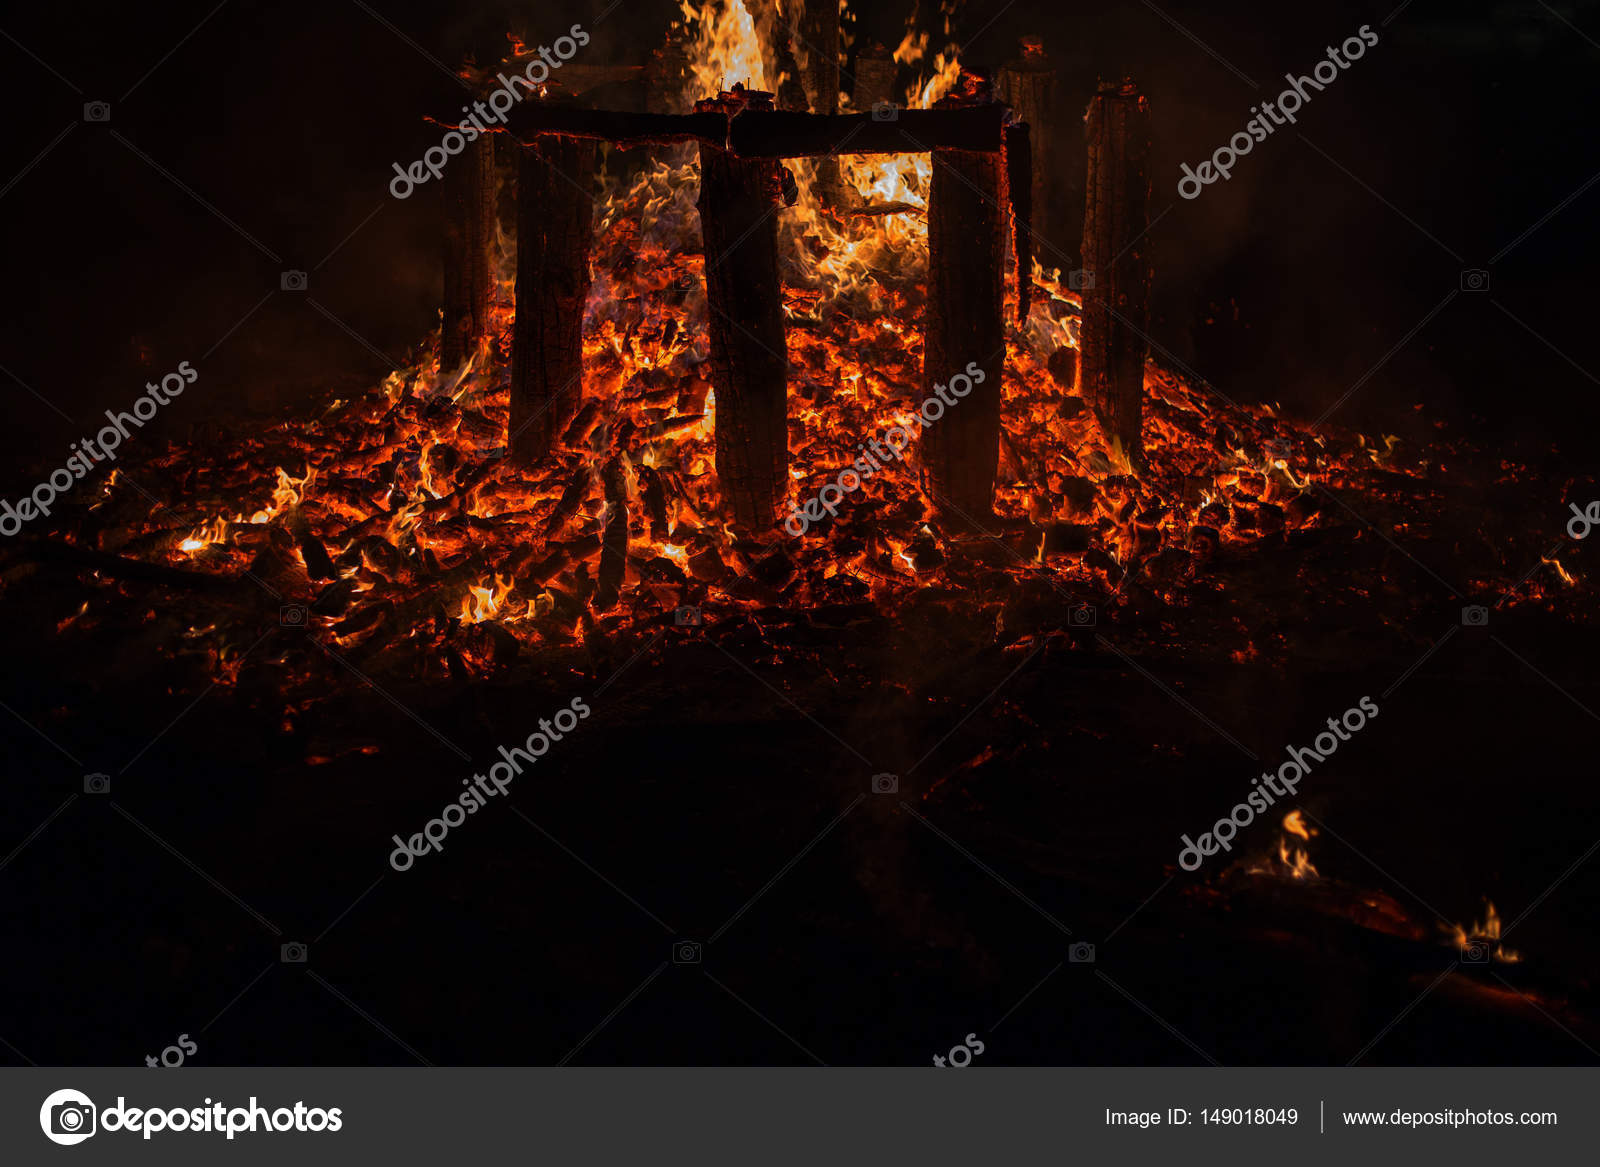 Embers Fire Fireplace Grill Fire Flame Black Background Stock Photo C Hd Design